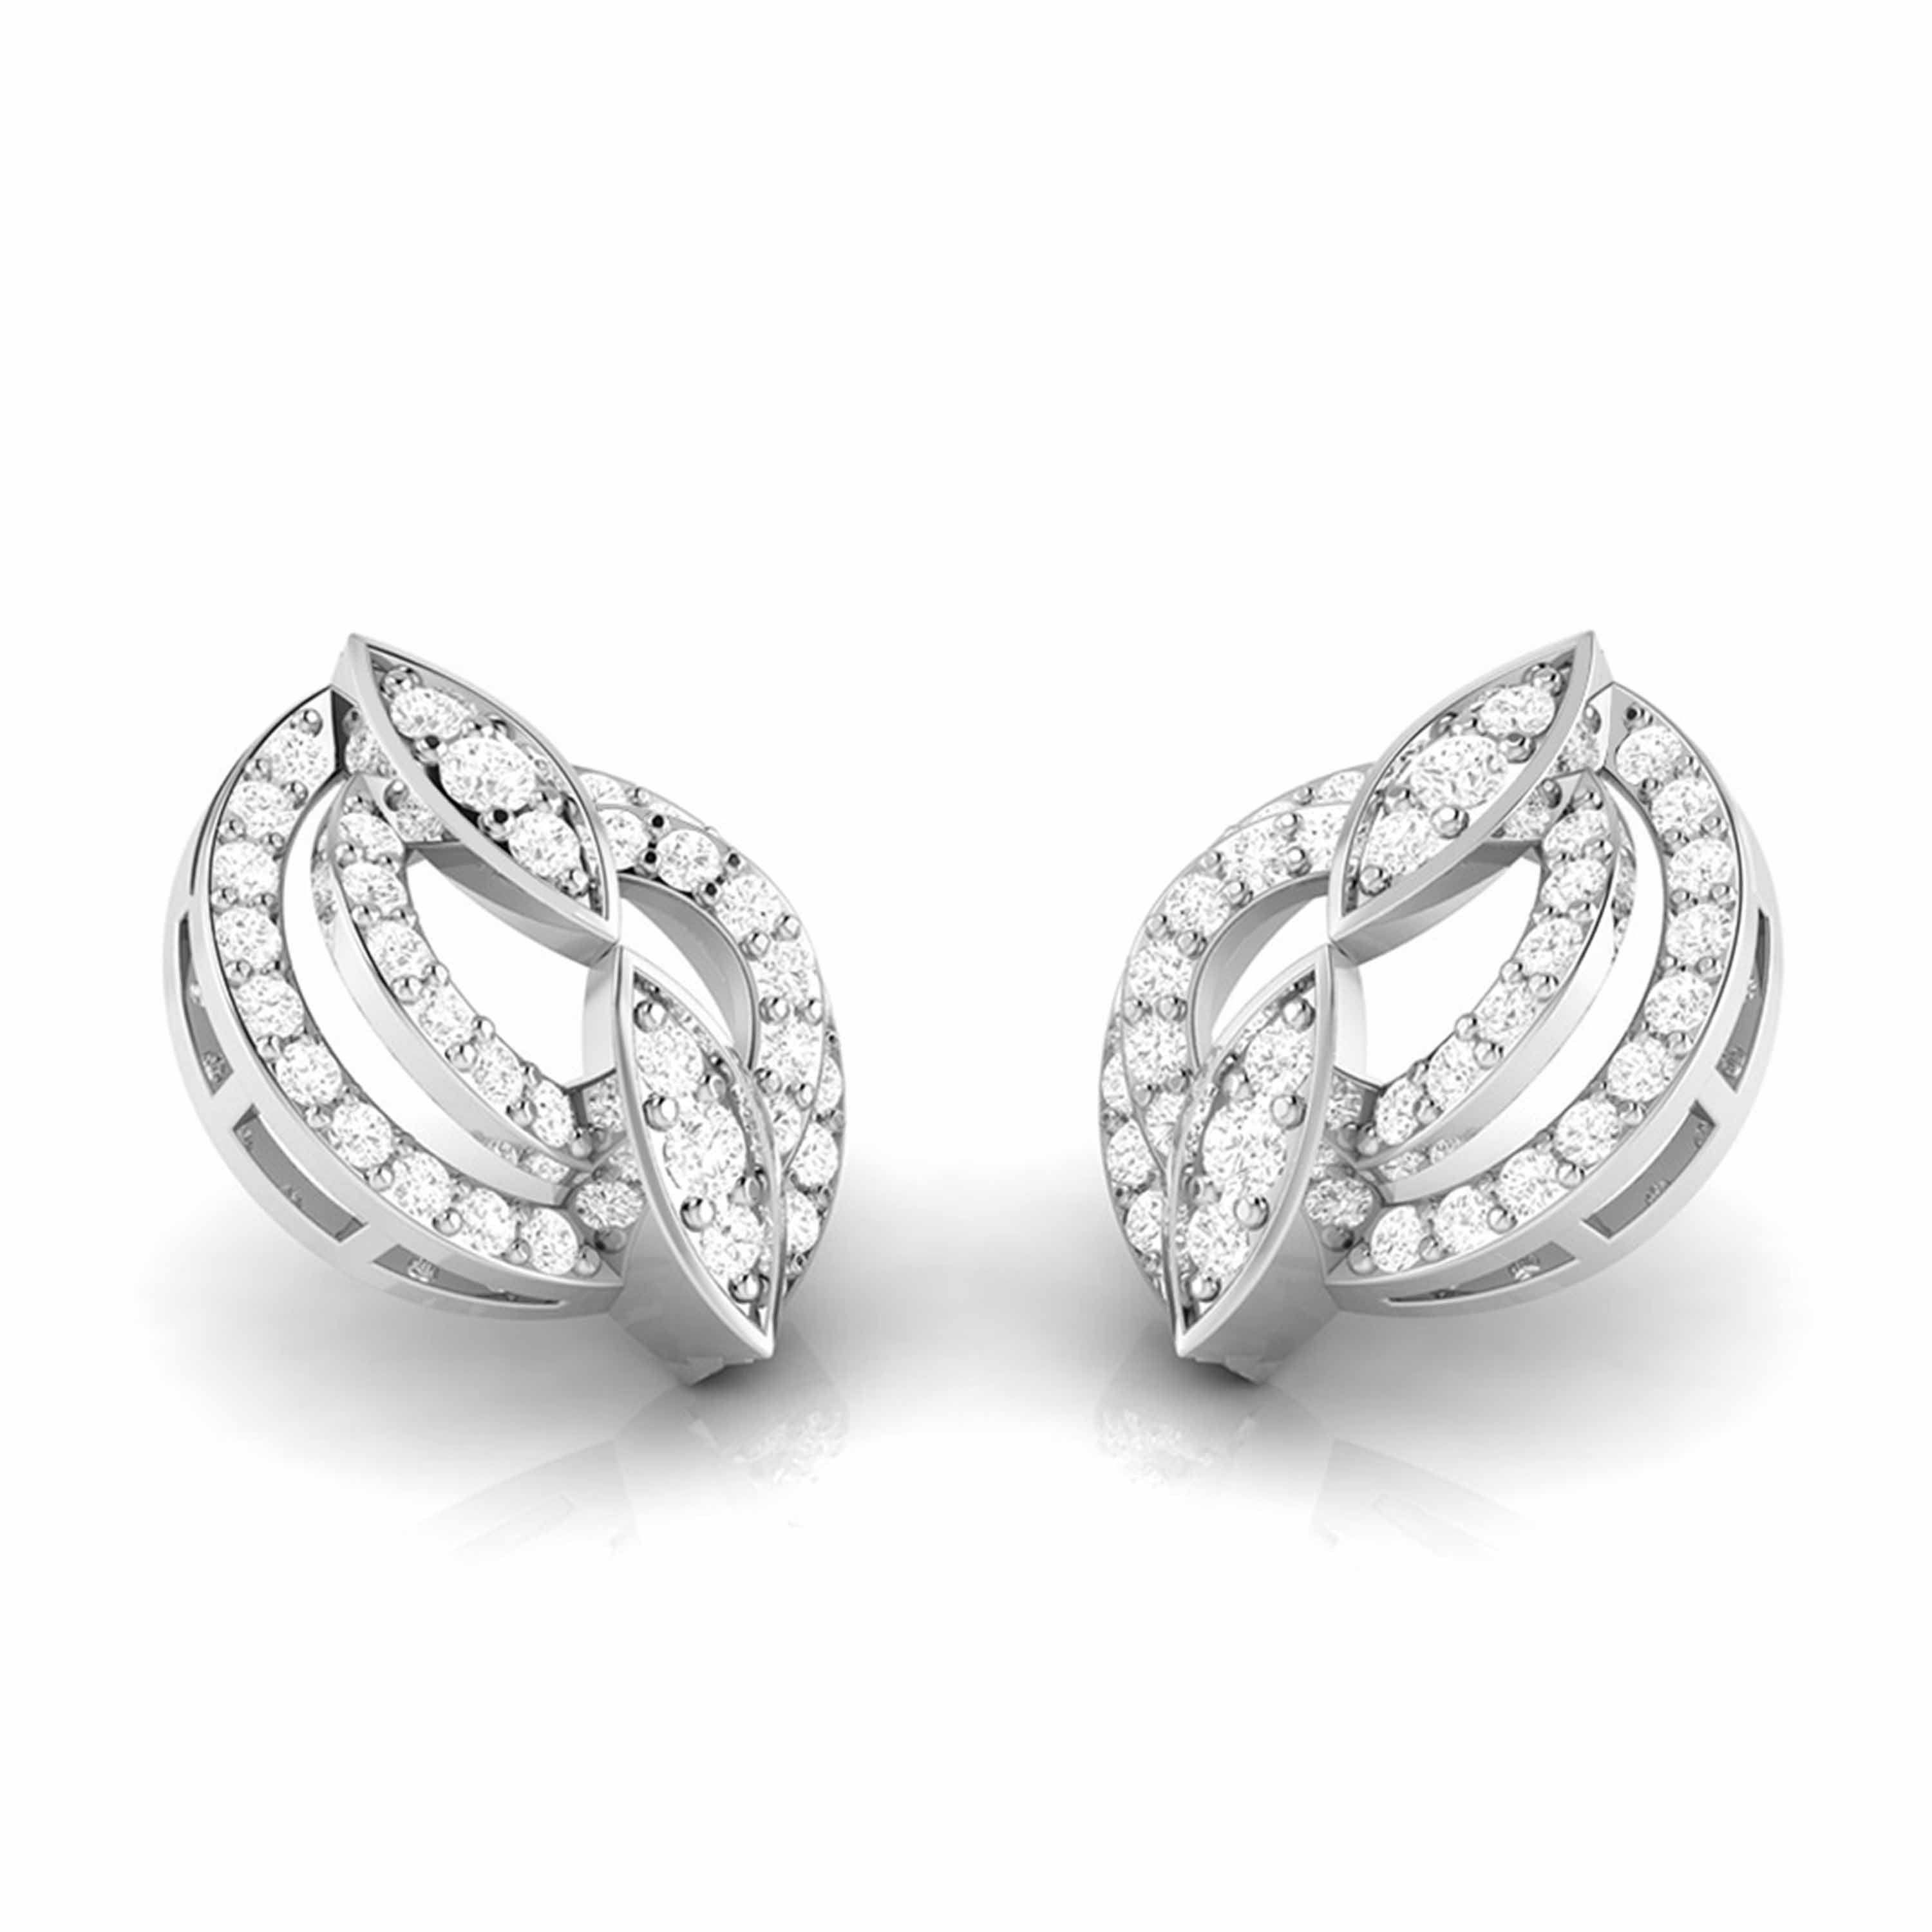 Platinum plated small earrings with white cubic zirconia stones 